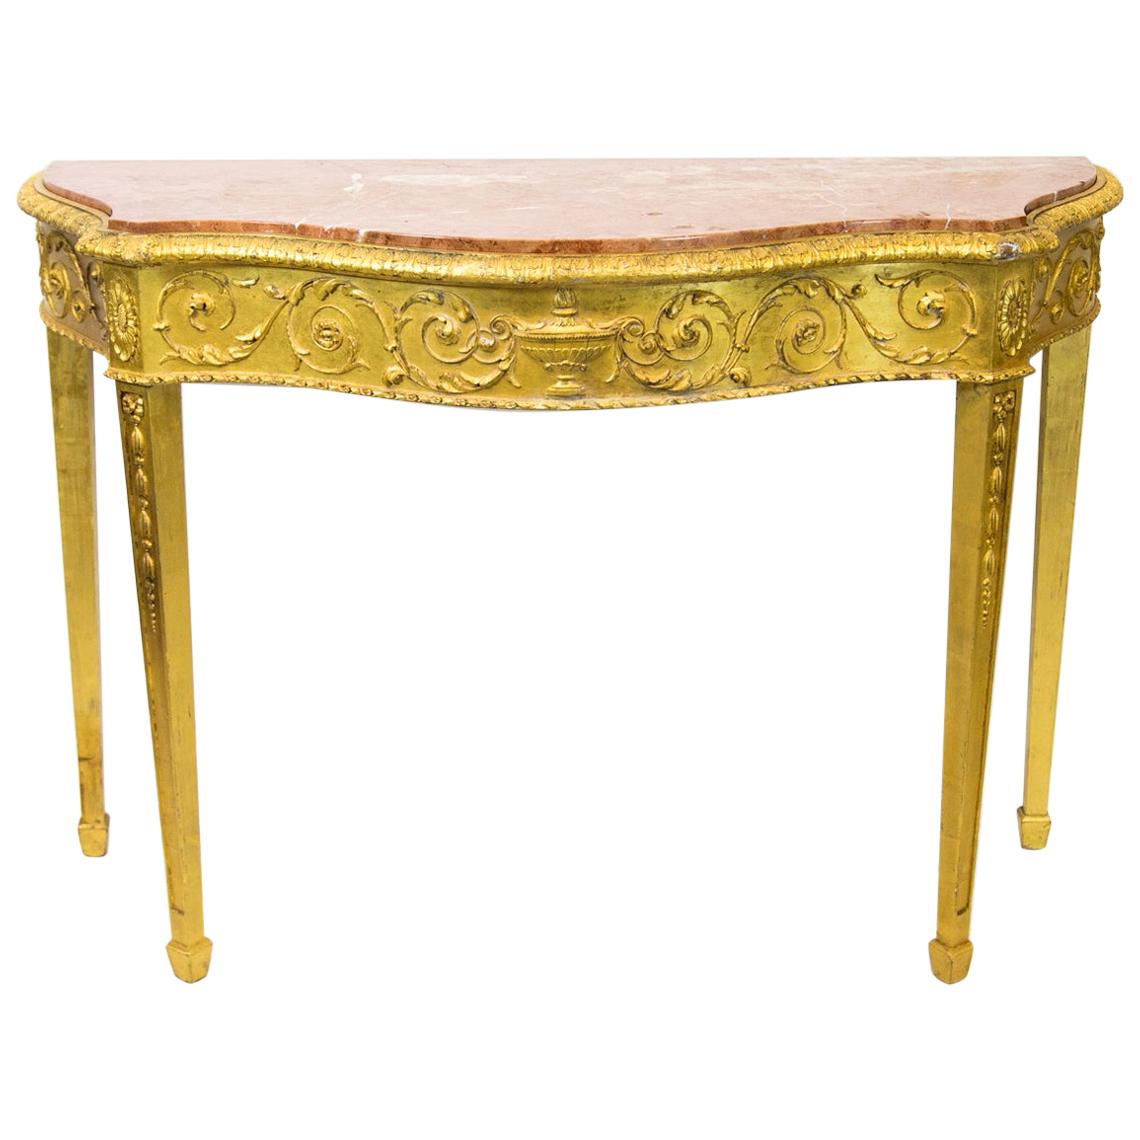 Serpentine English Marble-Top Gilt Console Table